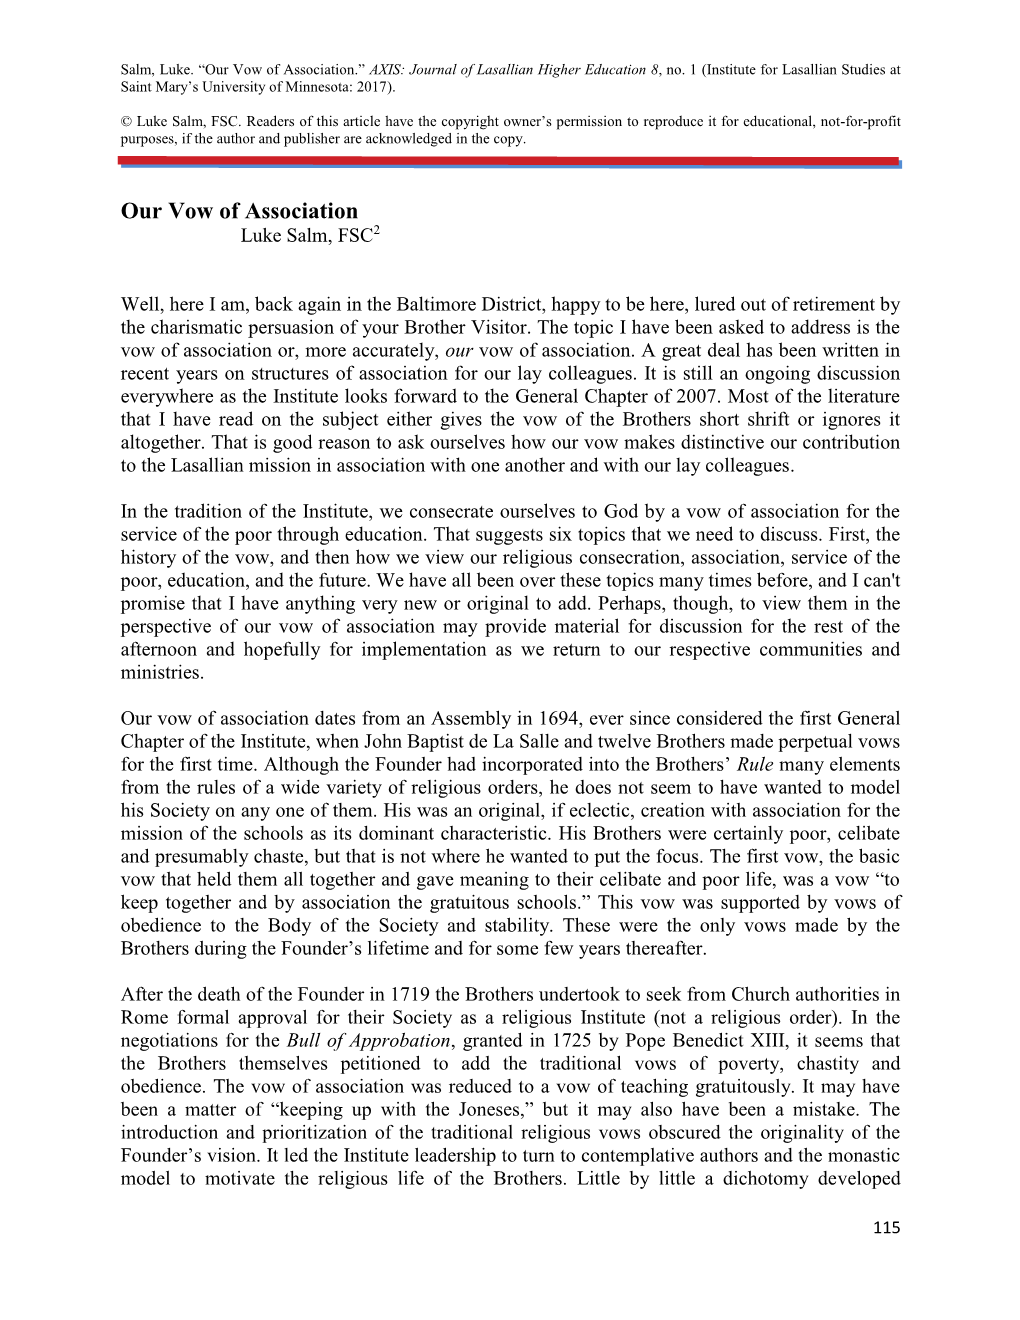 Our Vow of Association.” AXIS: Journal of Lasallian Higher Education 8, No